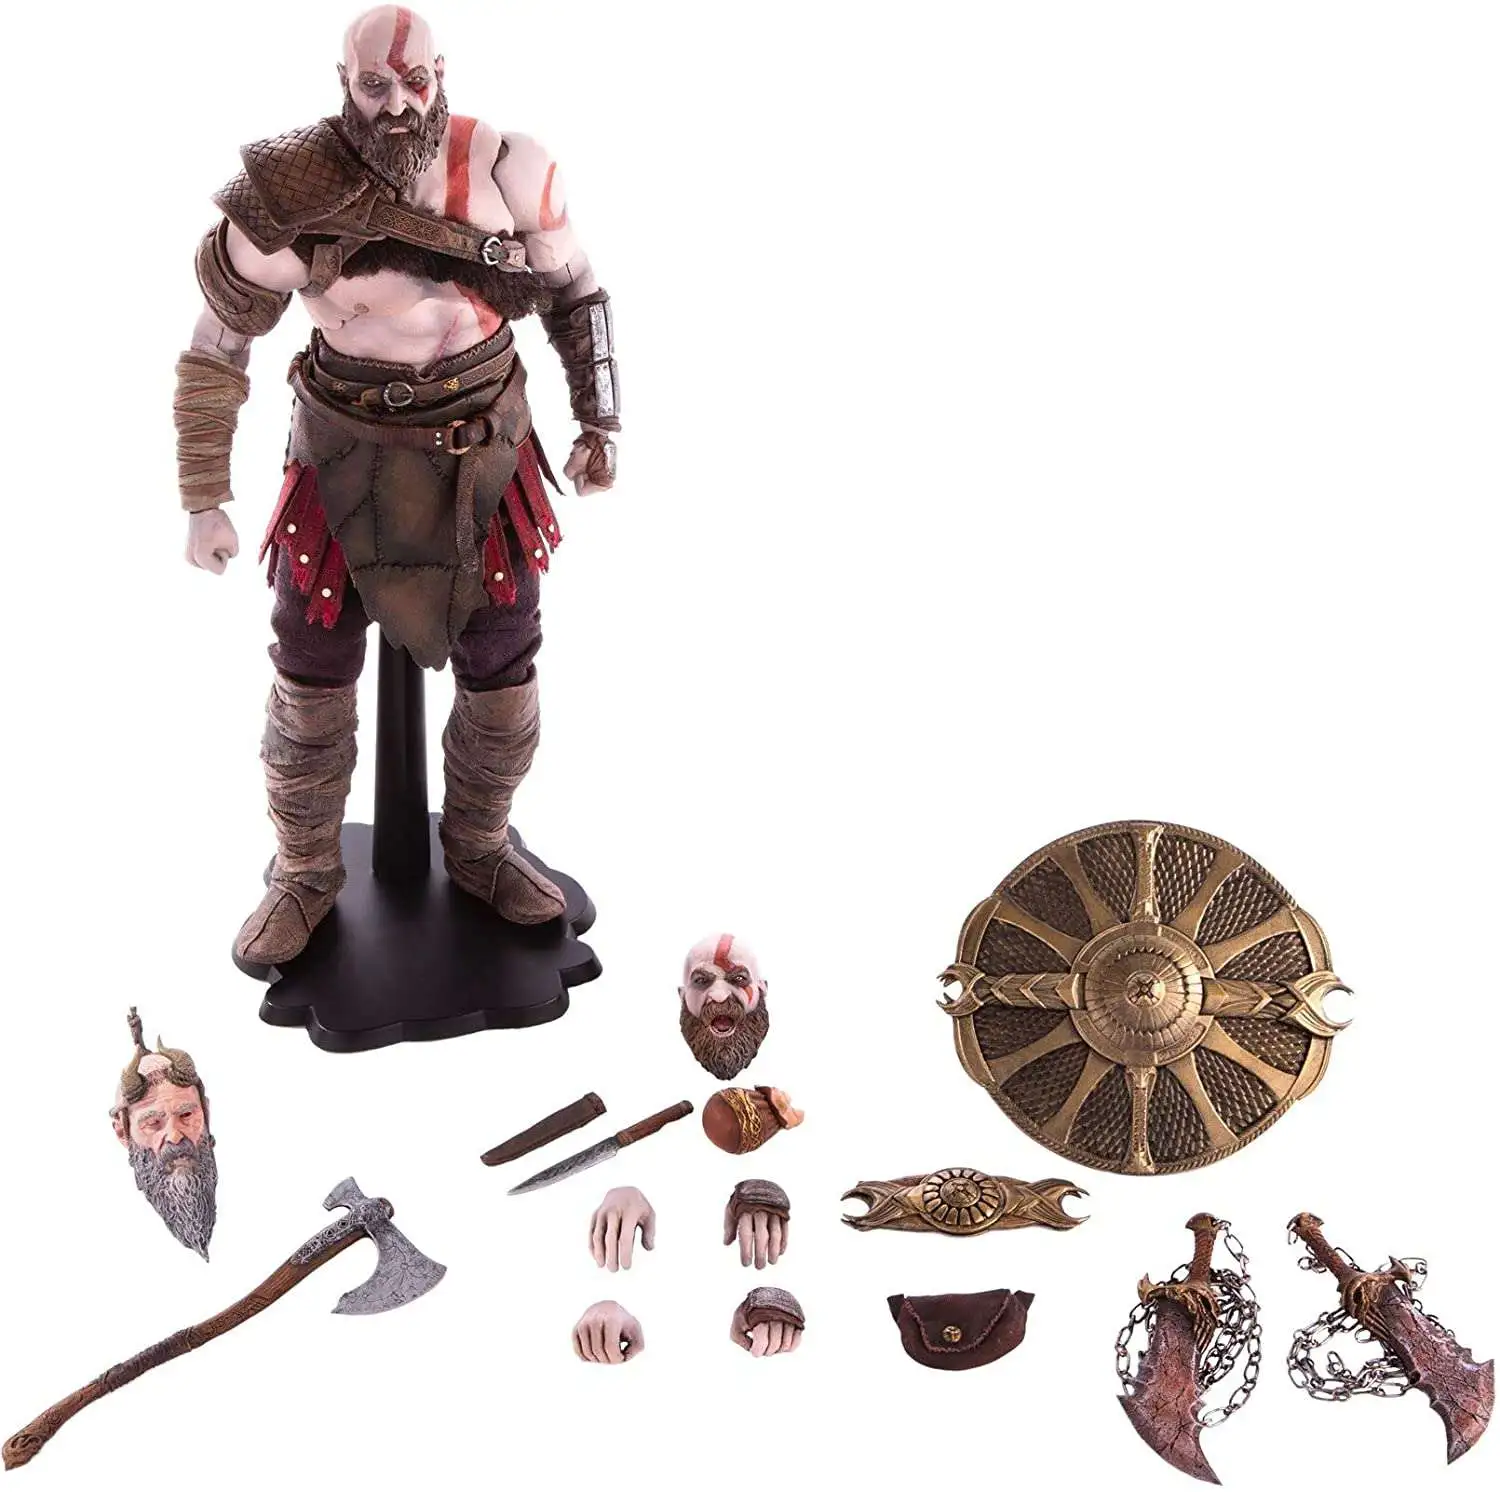 7" God of War 3 Ultimate Kratos Action Figure 1:12 Game Collection Toy Gift New 